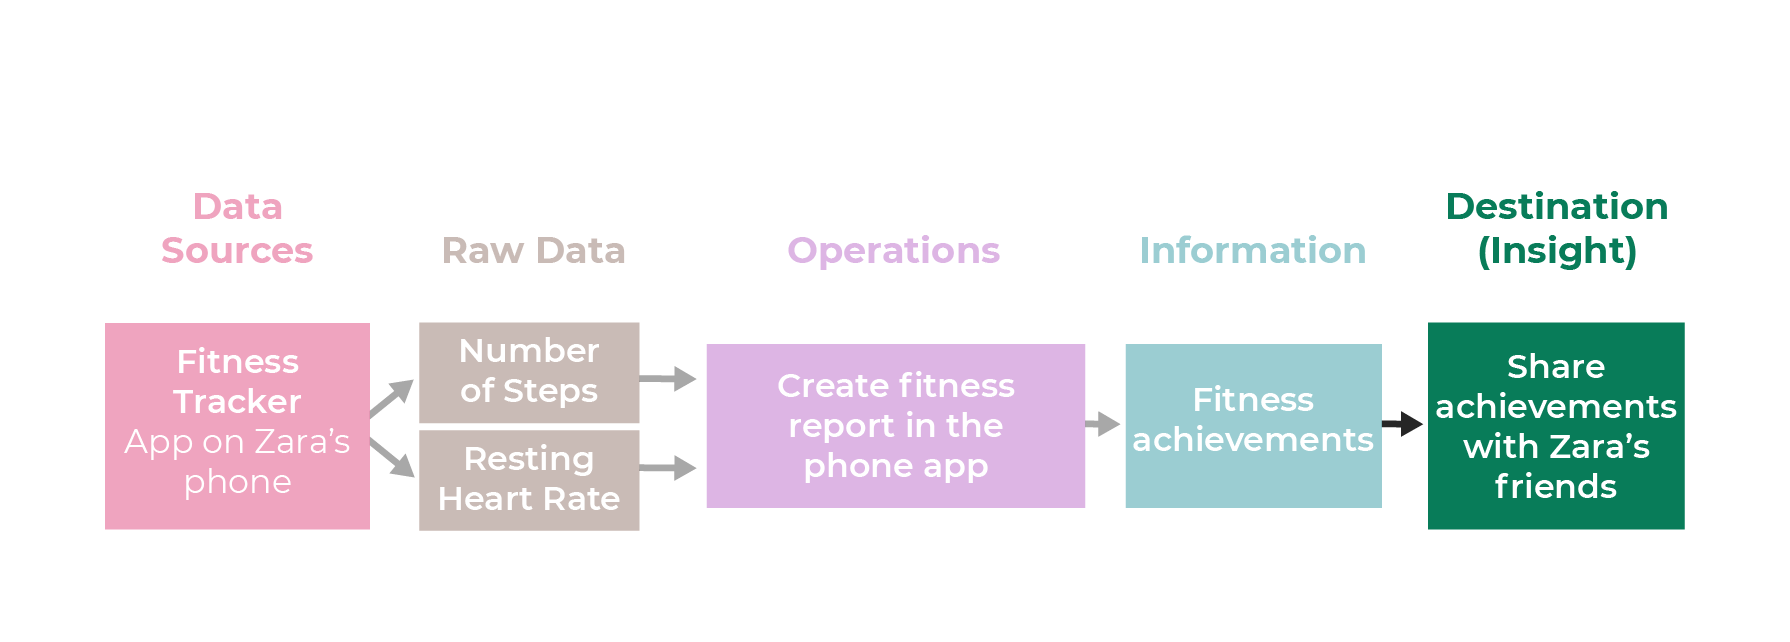 A picture shows the continuation of the previous data pipeline for Zara’s fitness tracker data. The destination of the information is sharing achievements with Zara’s friends.